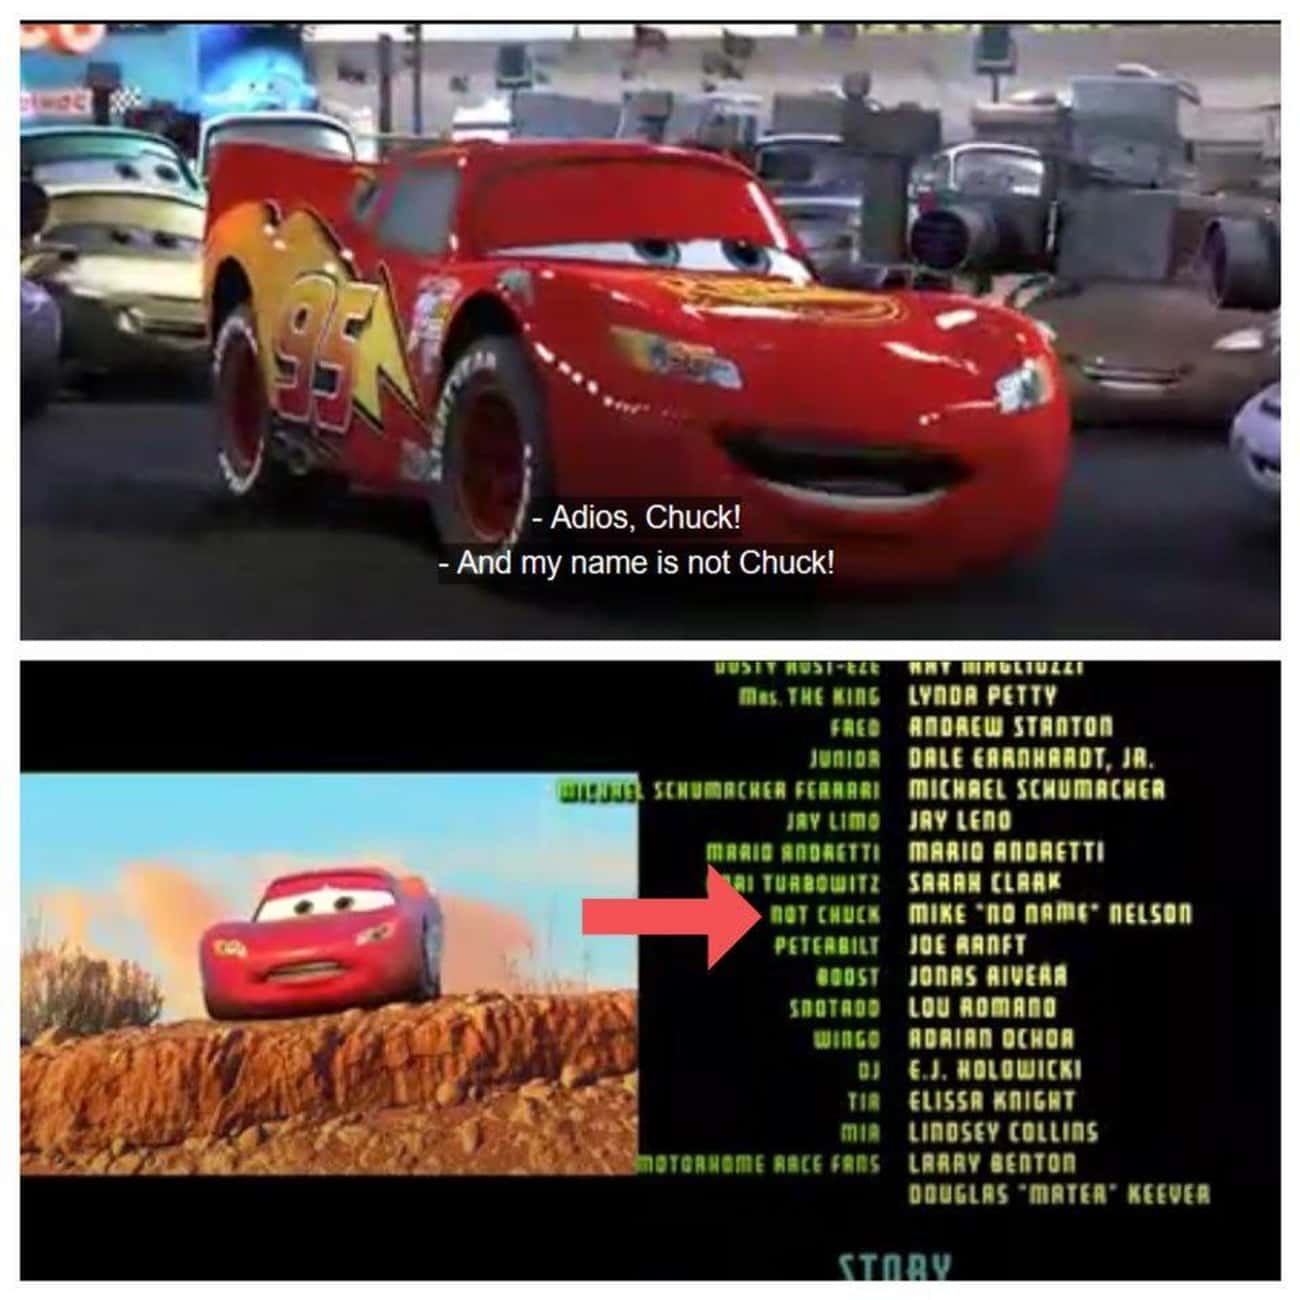 Have You Spotted These 9 Easter Eggs in the Cars Universe? - D23